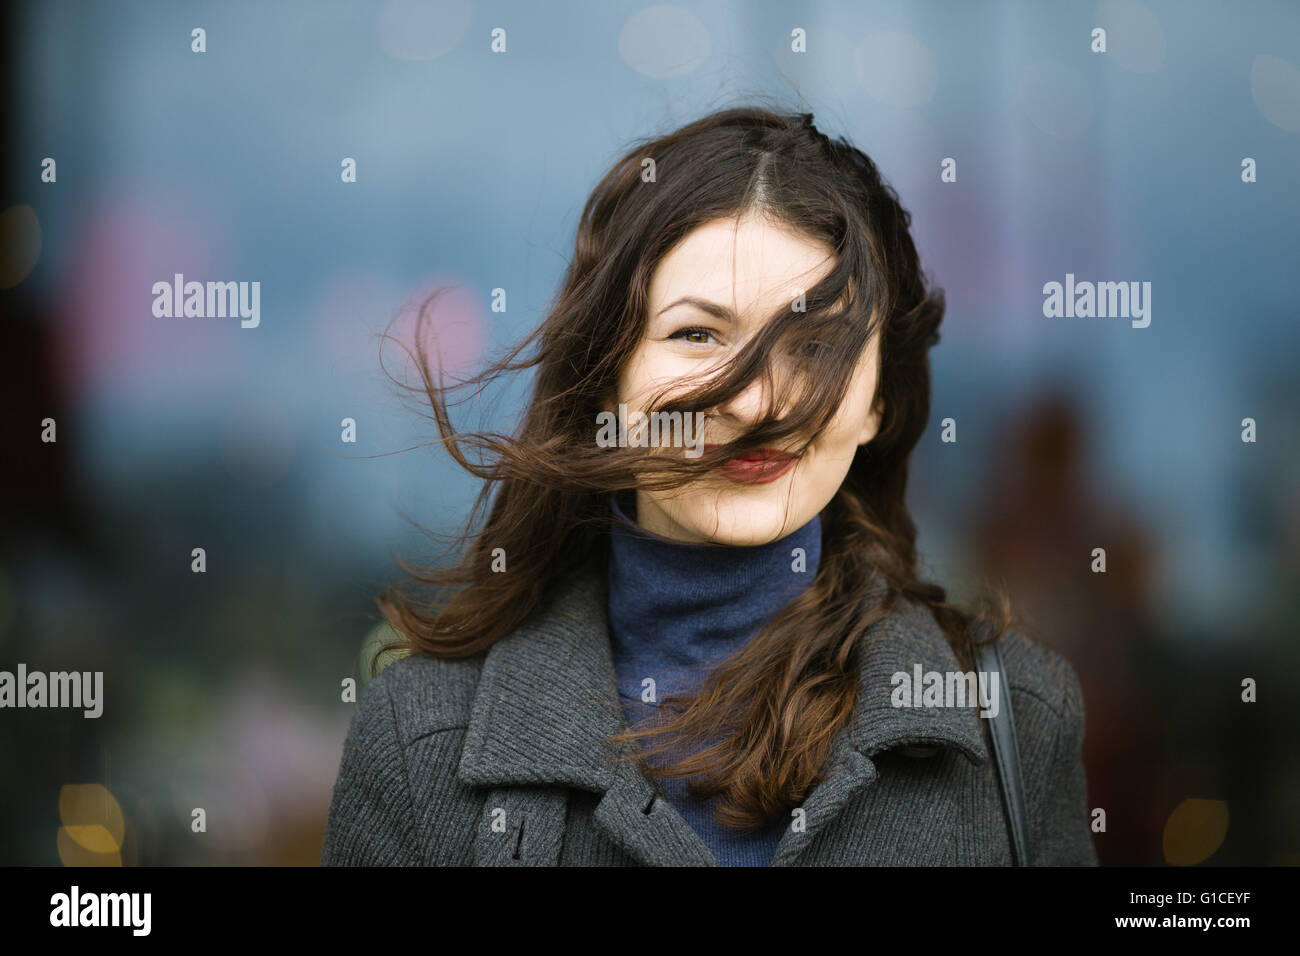 Portrait of a woman on a windy day Stock Photo